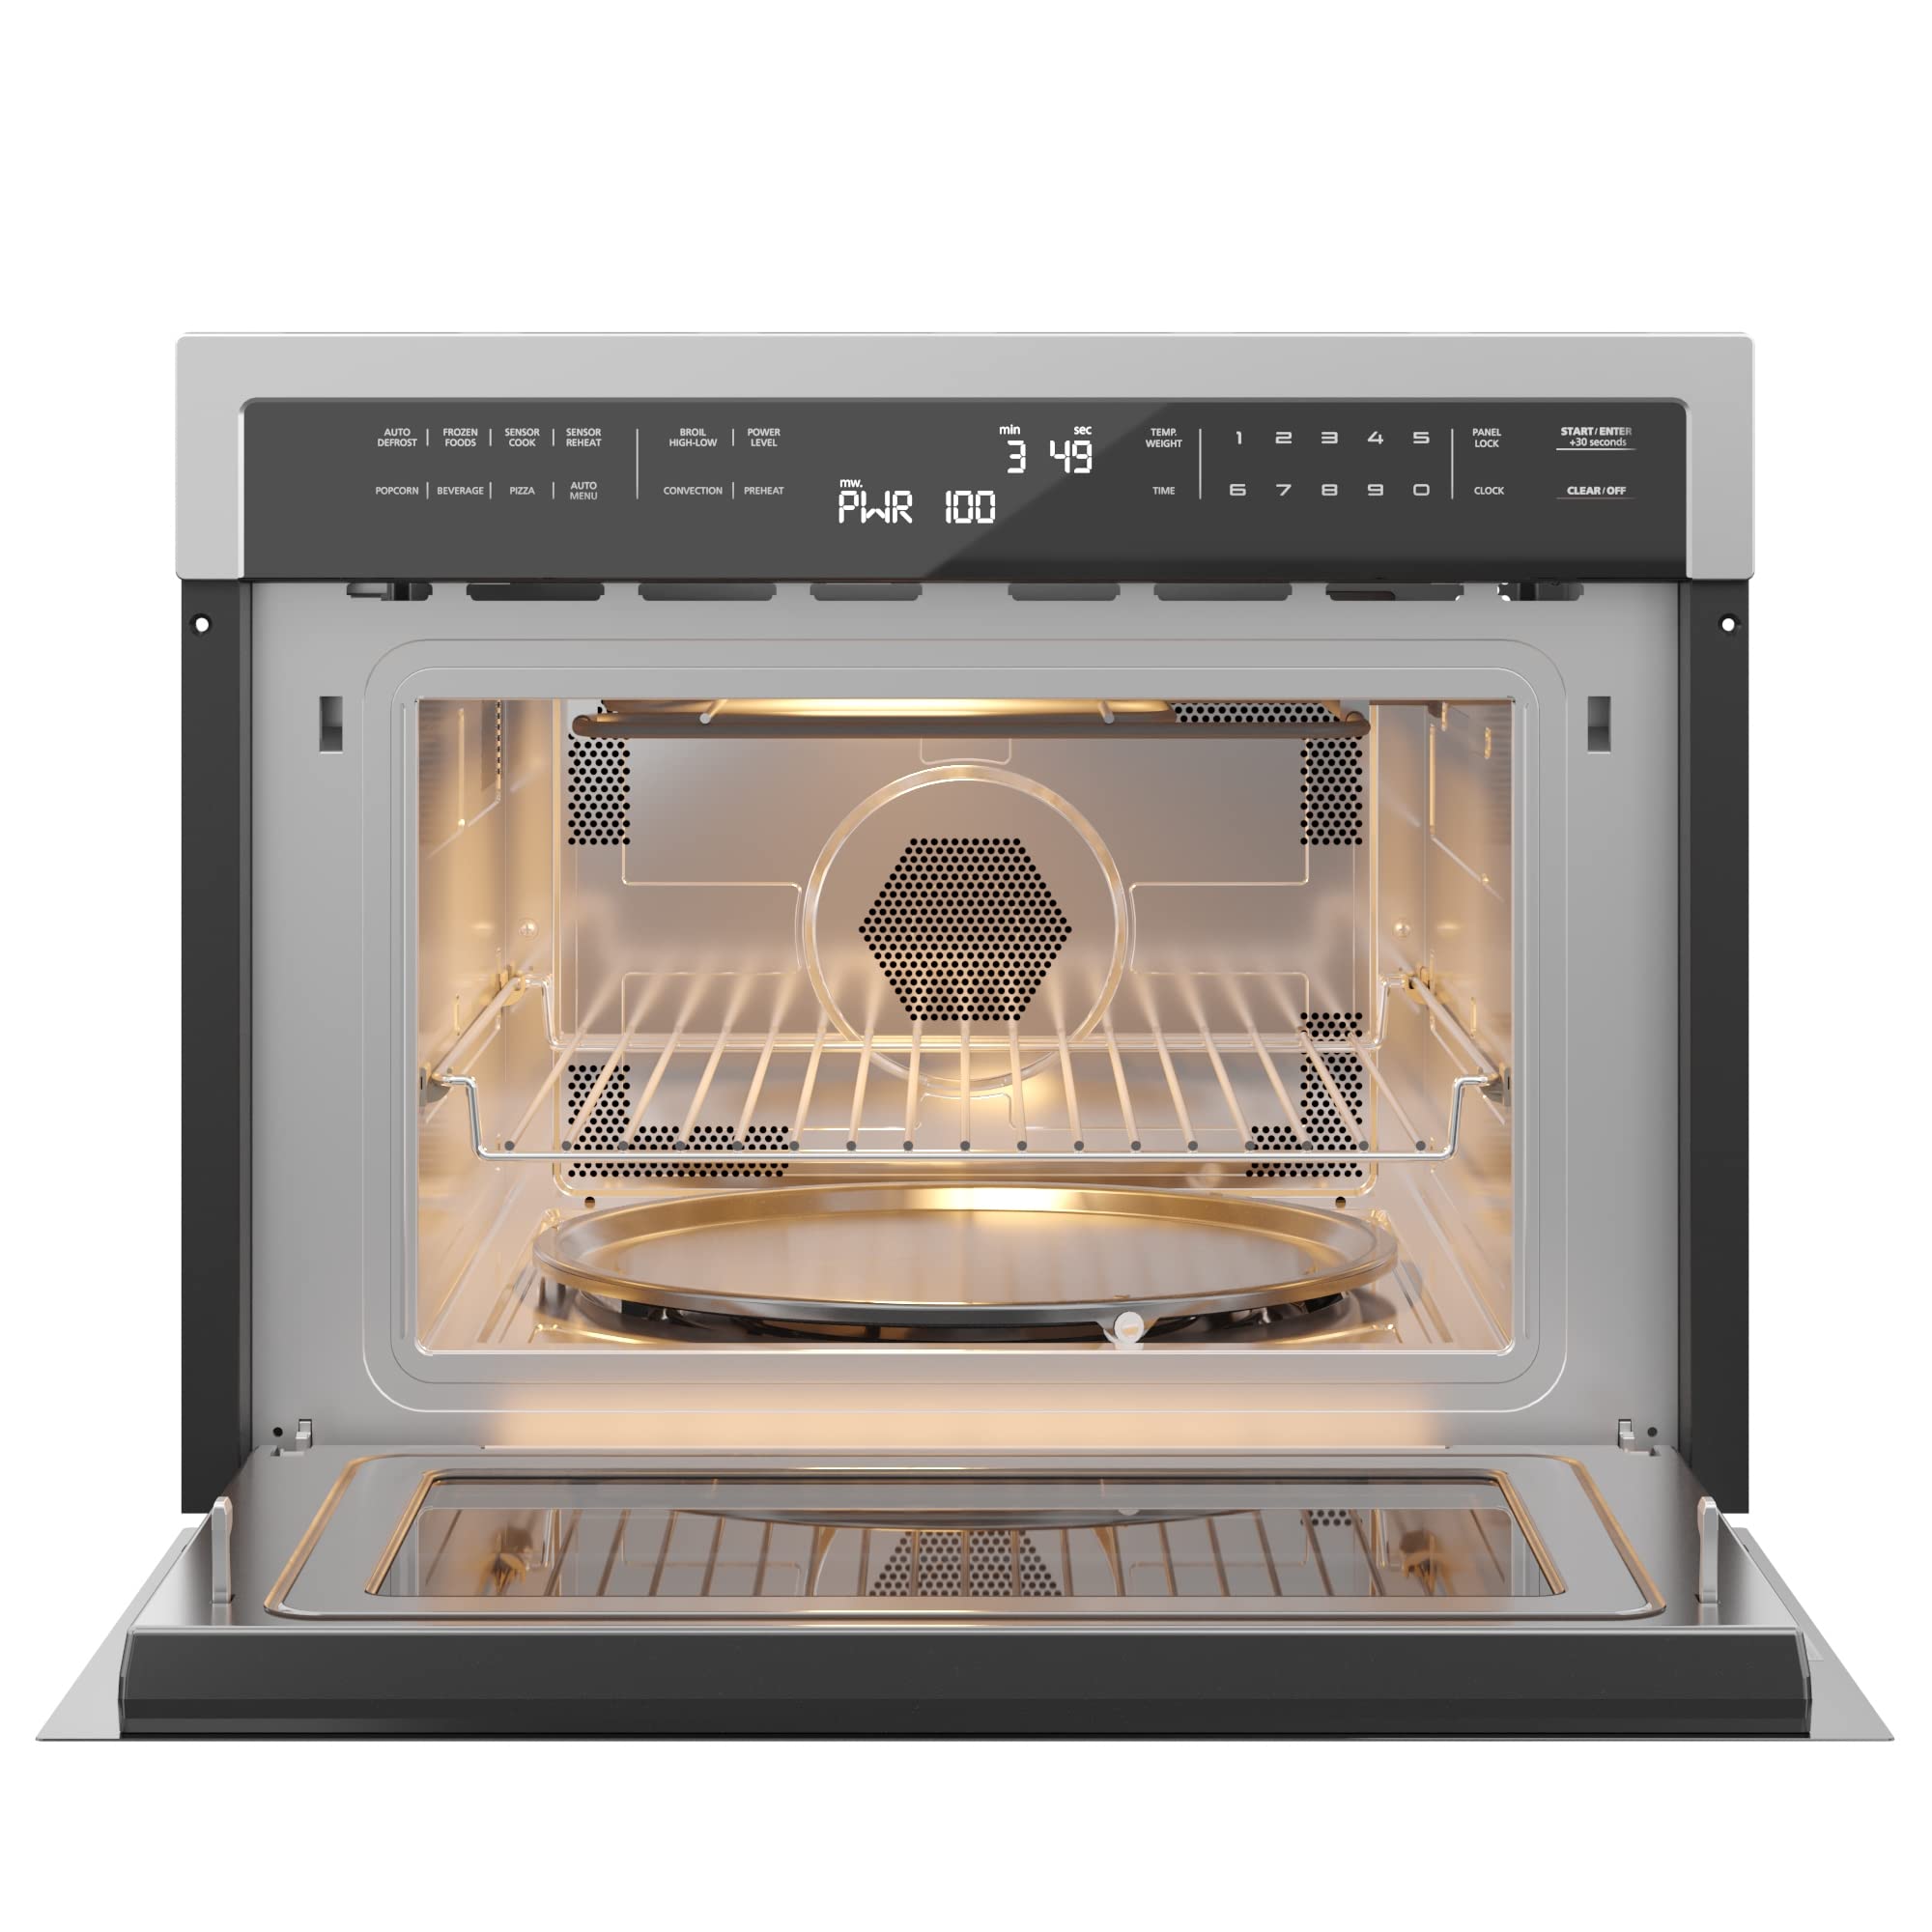 KoolMore KM-CWO24-SS 24 Inch Built-in Convection Oven and Microwave Combination with Broil, Soft Close Door, 1000 Watt Power, Stainless Steel Finish, Touch Control LCD Display, 1.6 Cu. Ft, Silver